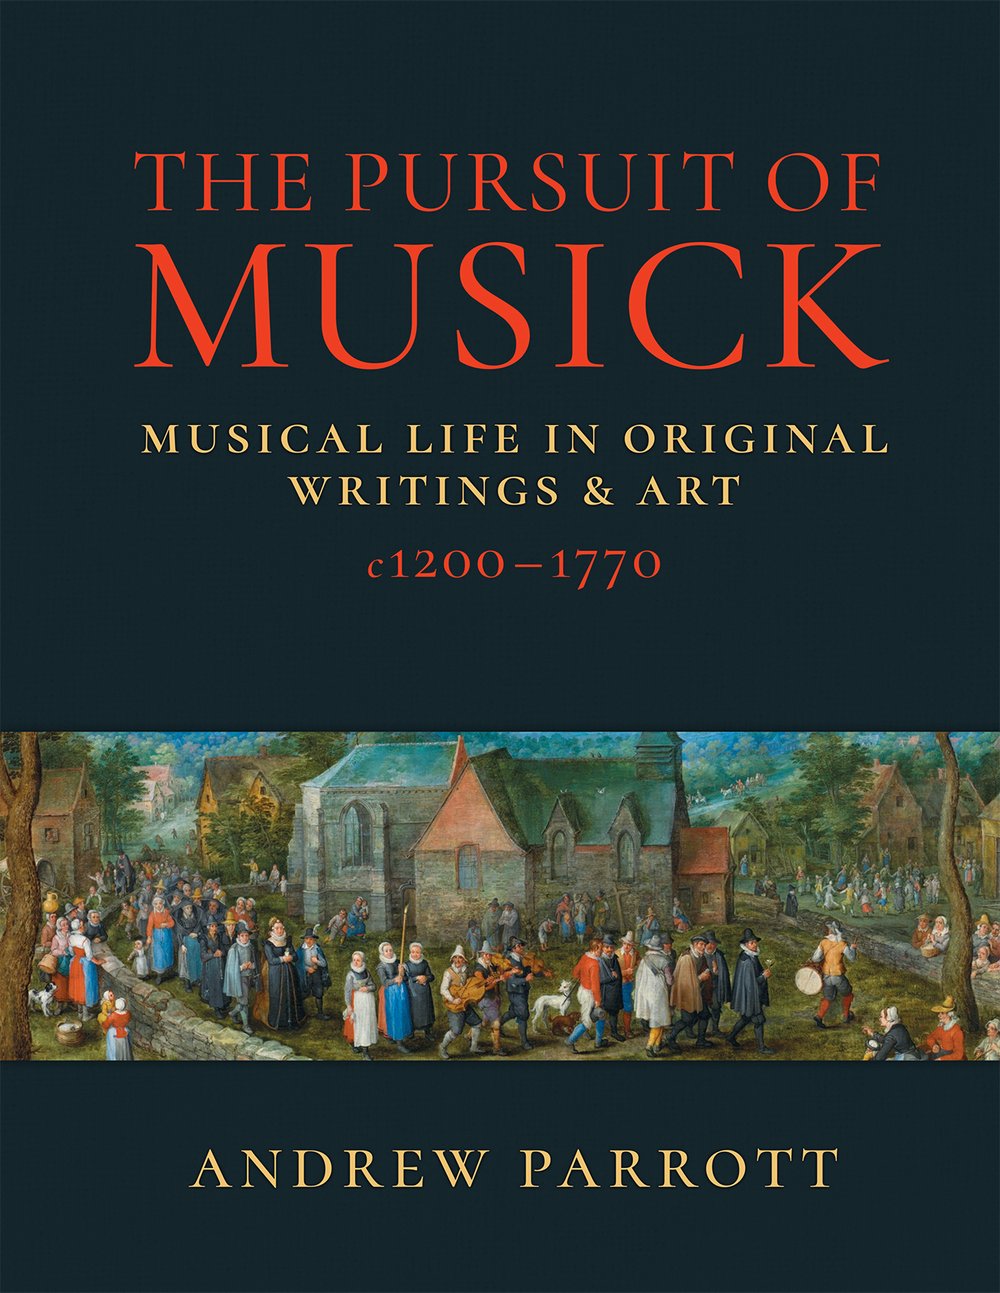 Andrew Parrott The Pursuit of Musick: Musical Life in Original Writings and Art c1200-1770